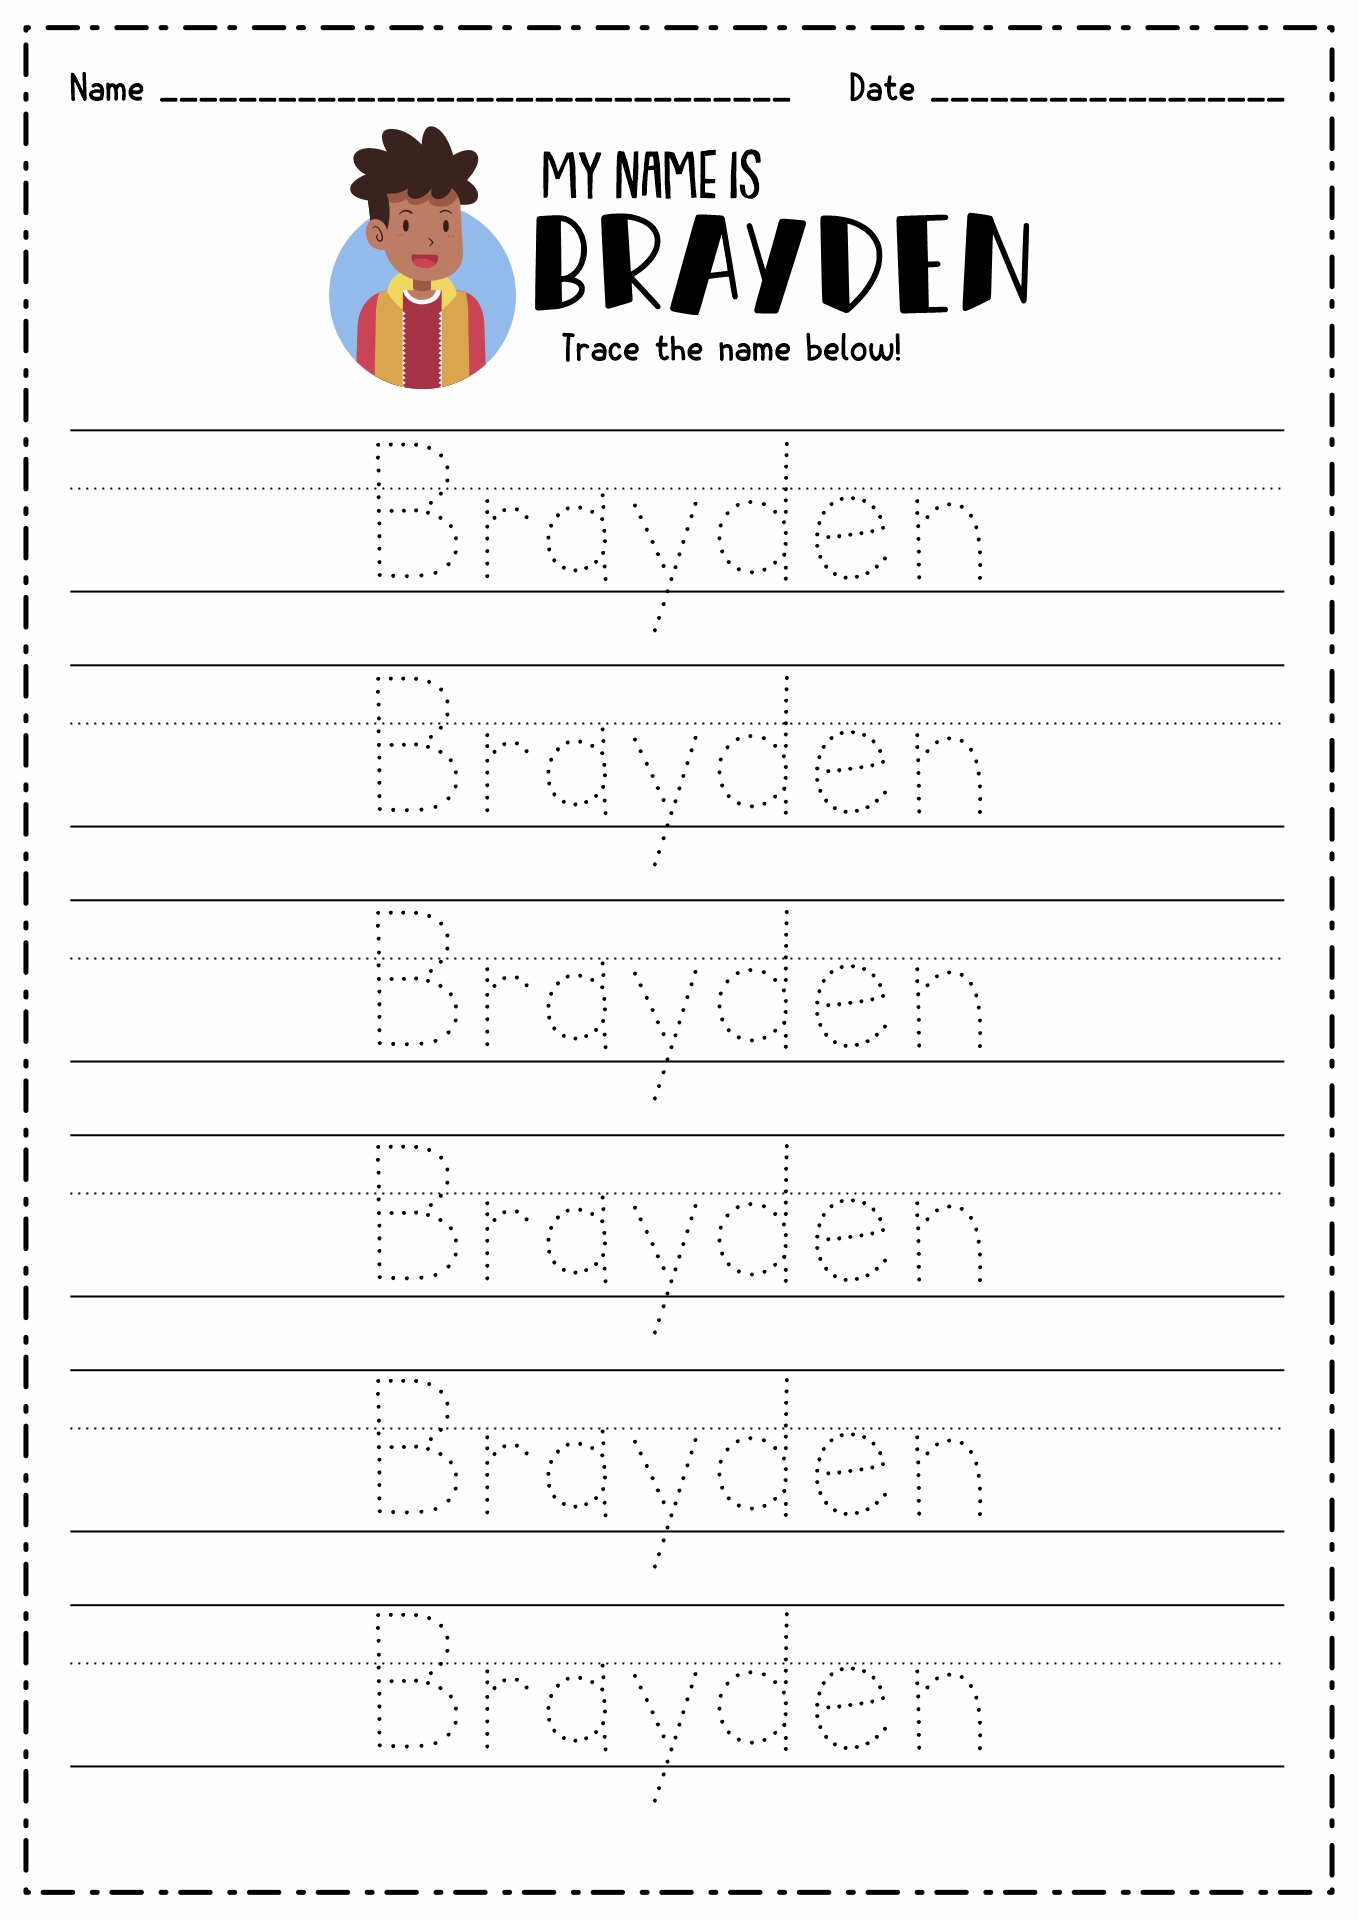 14 Best Images of Create Name Tracing Worksheets - Create ...